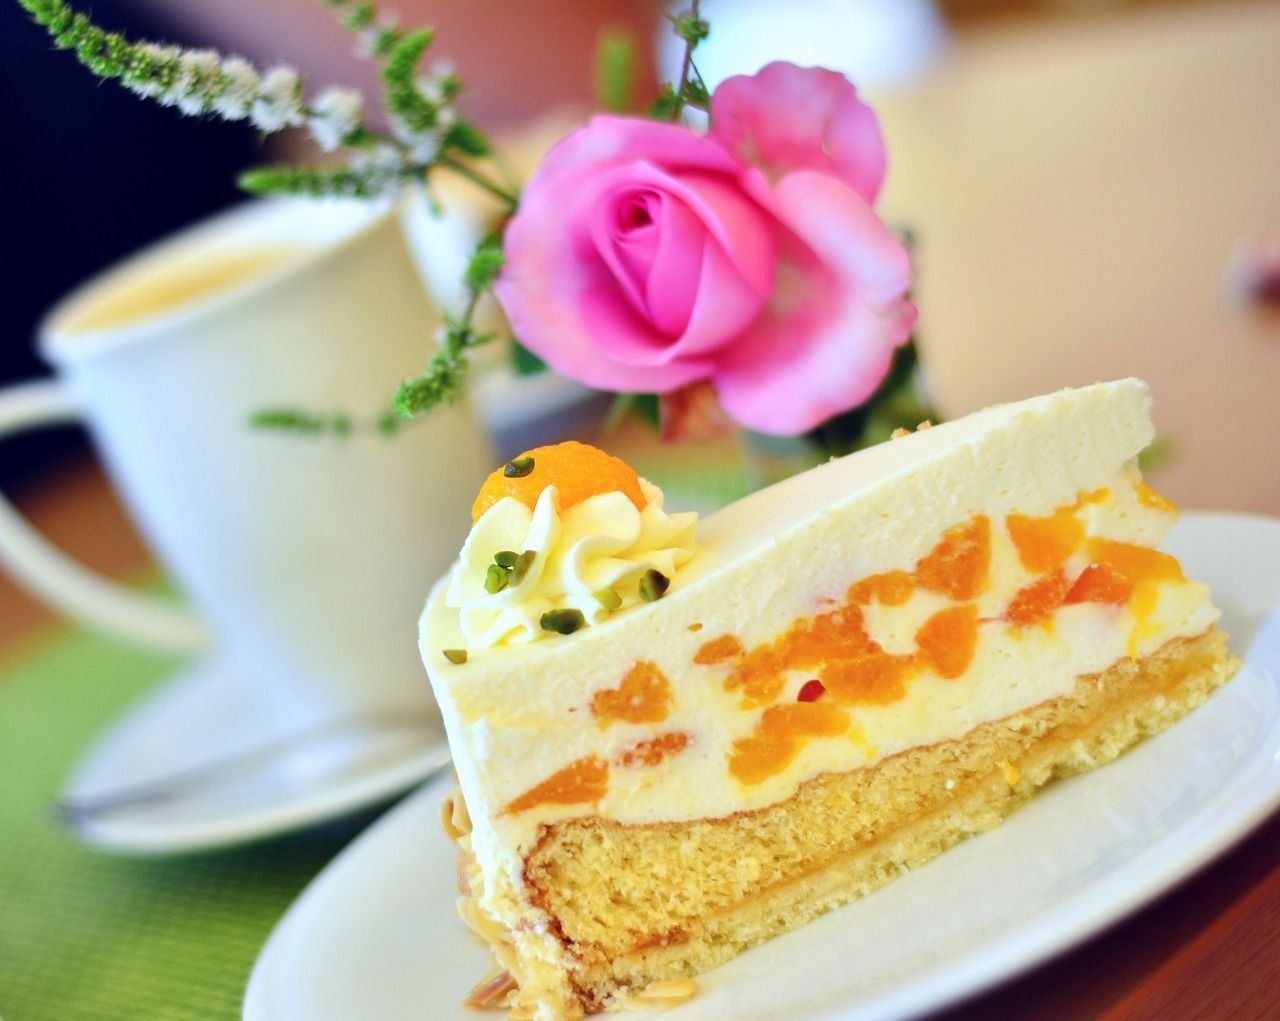 Where are the best cakes to order in Omsk in 2022